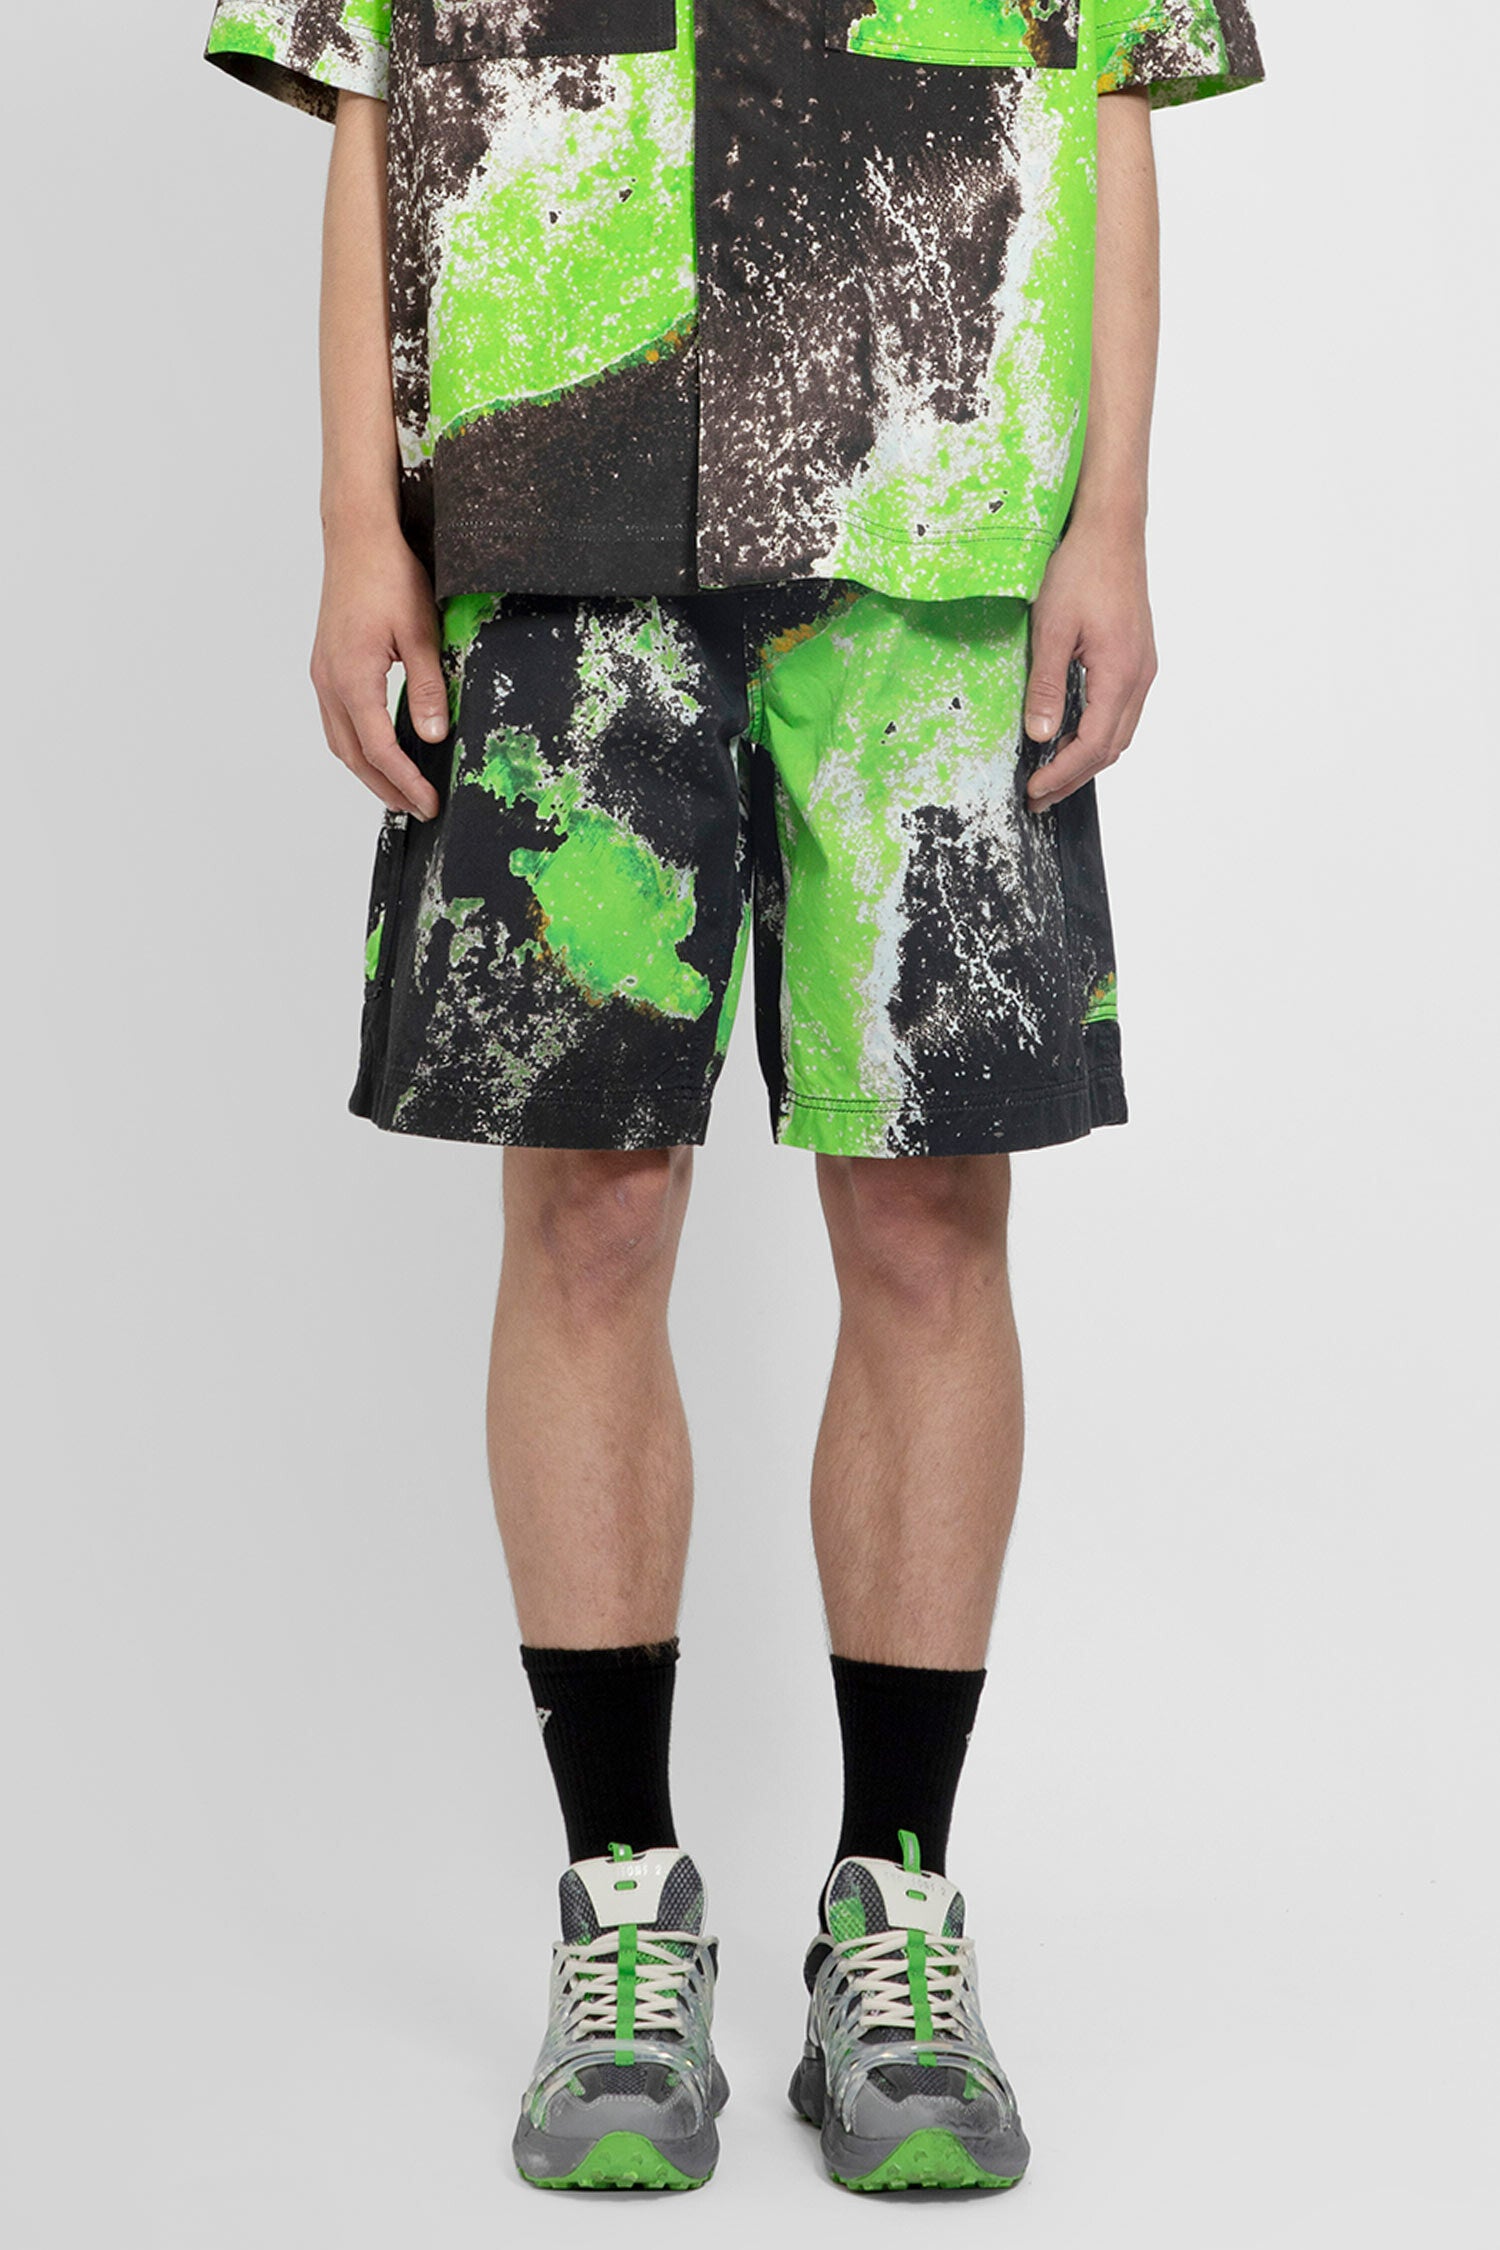 44 LABEL GROUP MAN MULTICOLOR SHORTS & SKIRTS